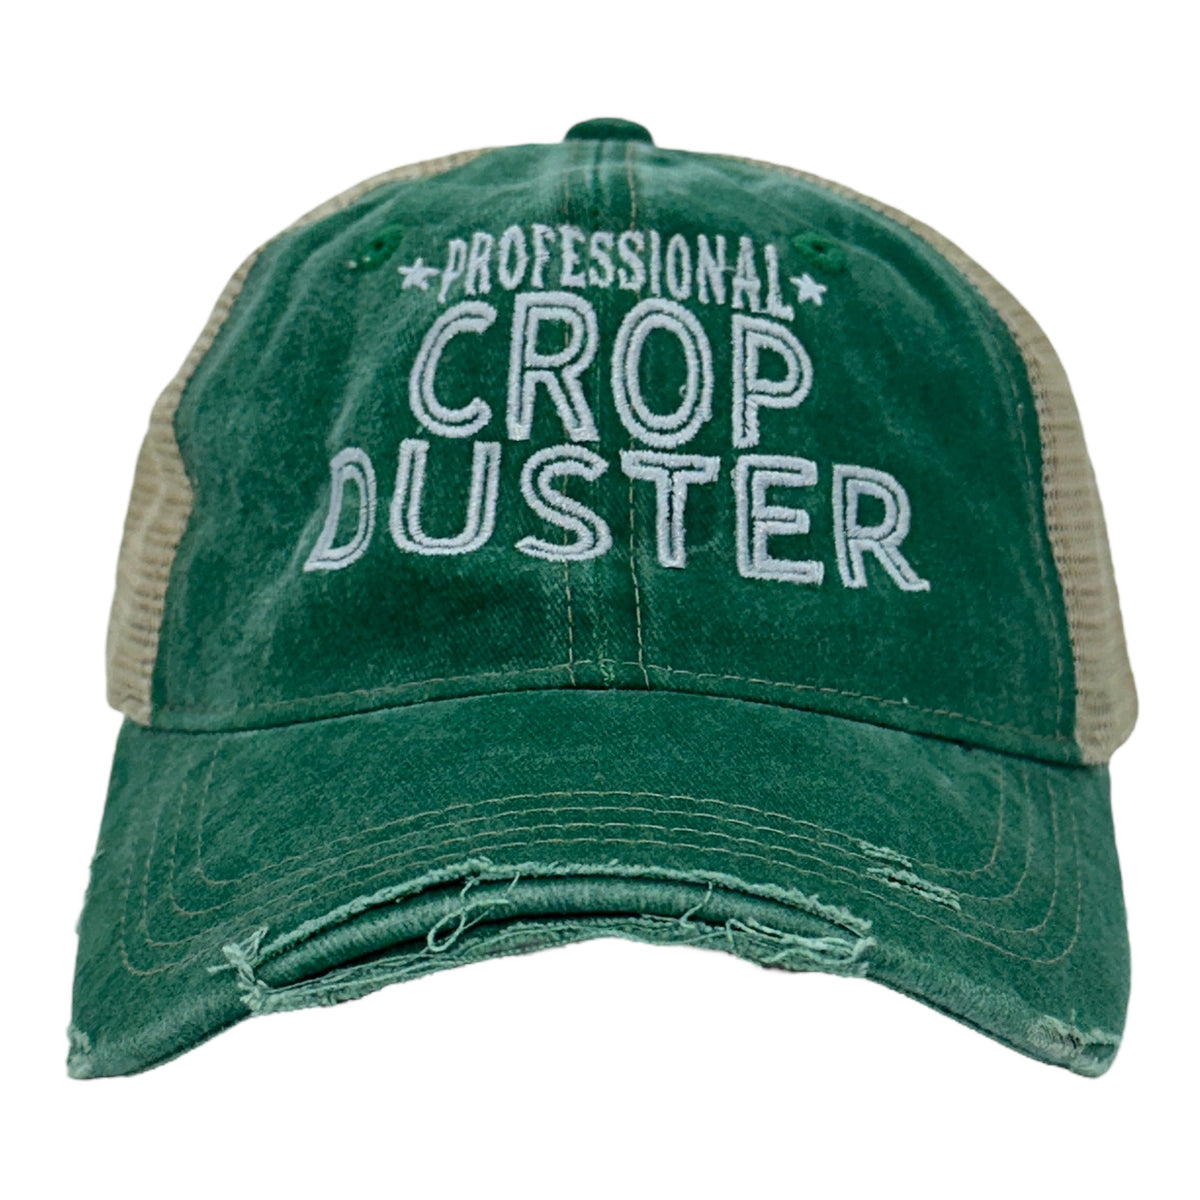 Funny Trucker Black - Pro Crop Duster Professional Crop Duster Nerdy Sarcastic Toilet Tee